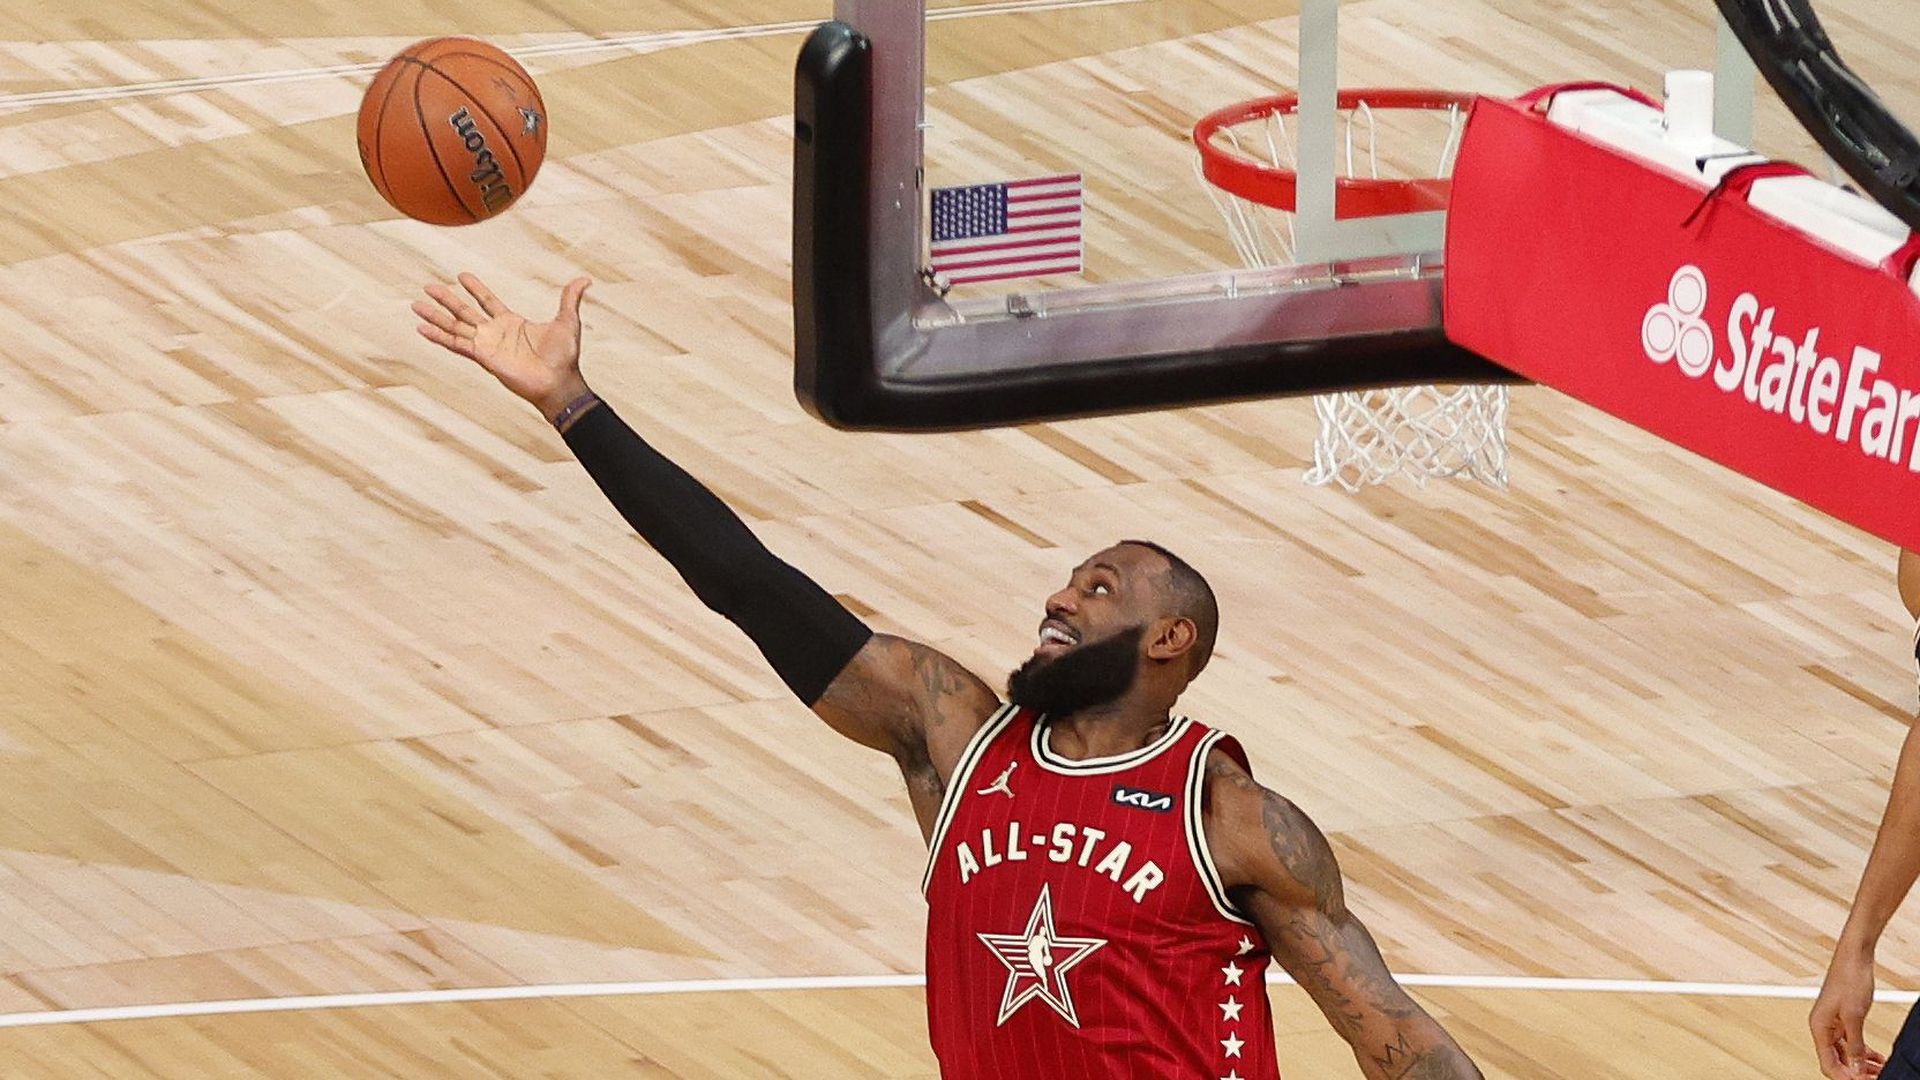 Lebron James jumps for the ball during the NBA All-Star Game.